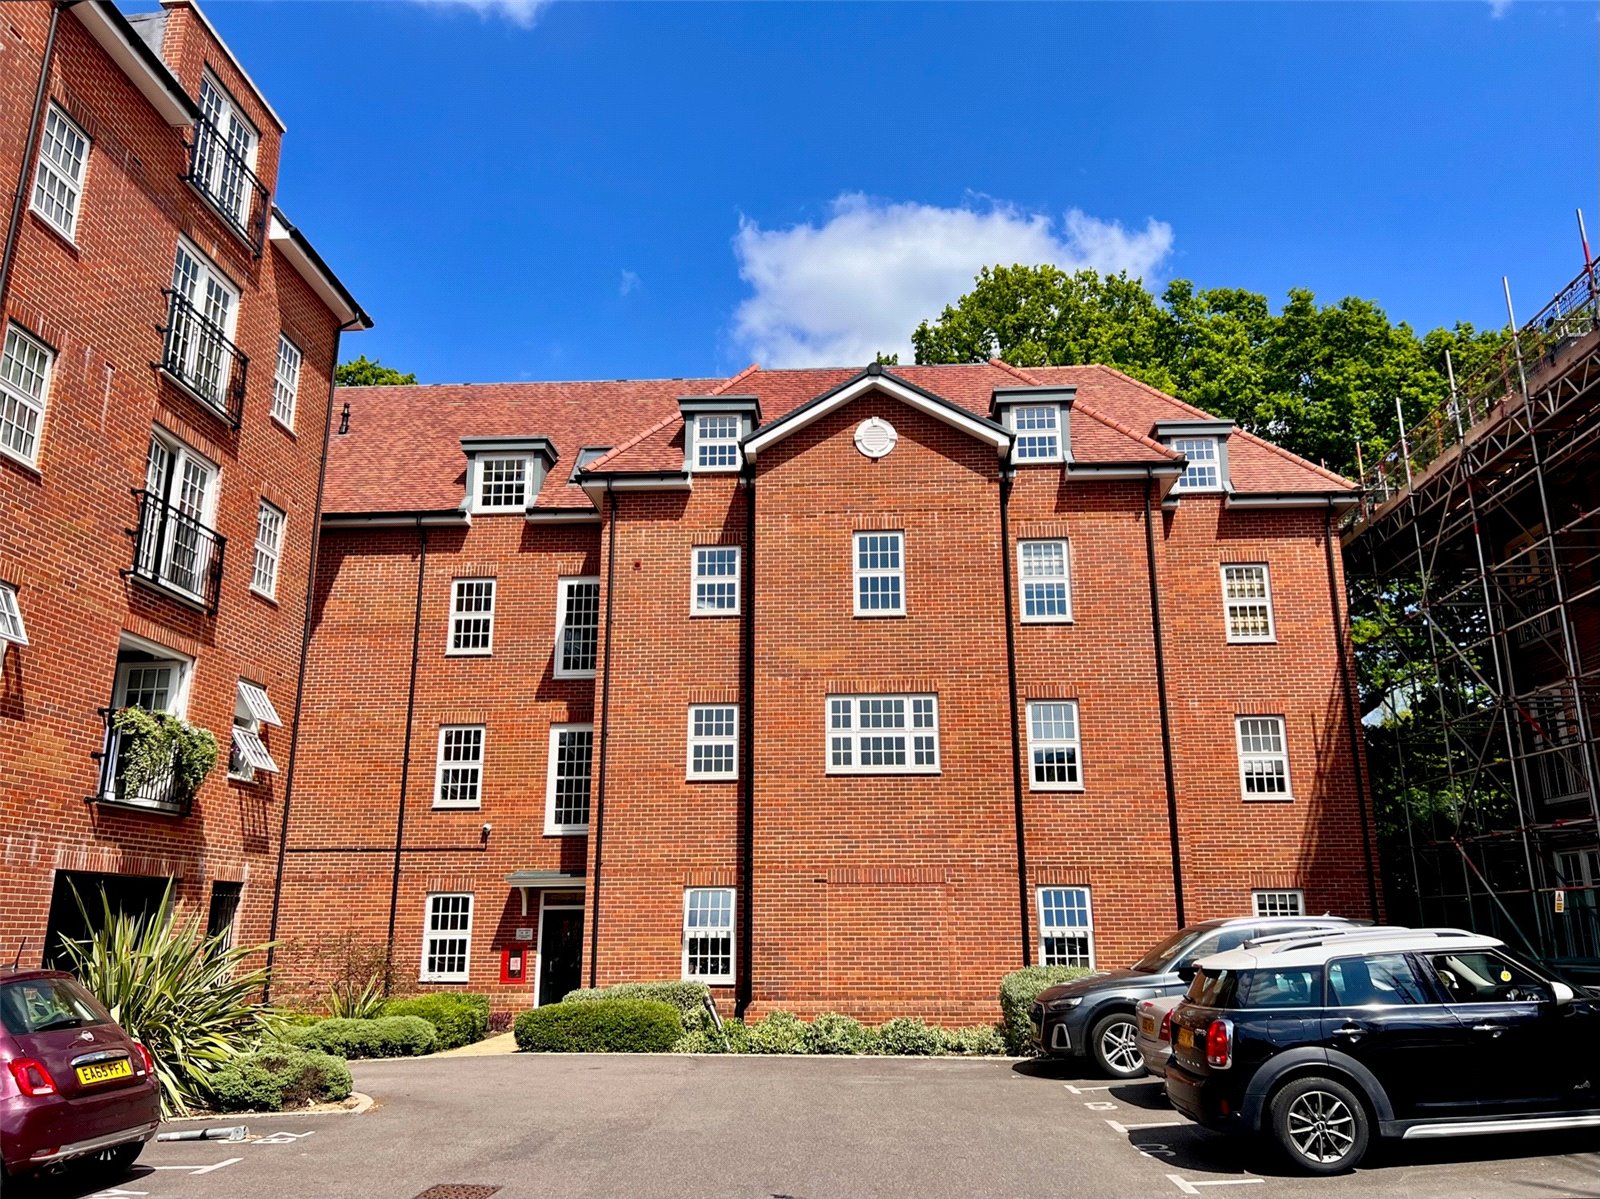 3 bed apartment to rent in Collison Avenue, Barnet - Property Image 1